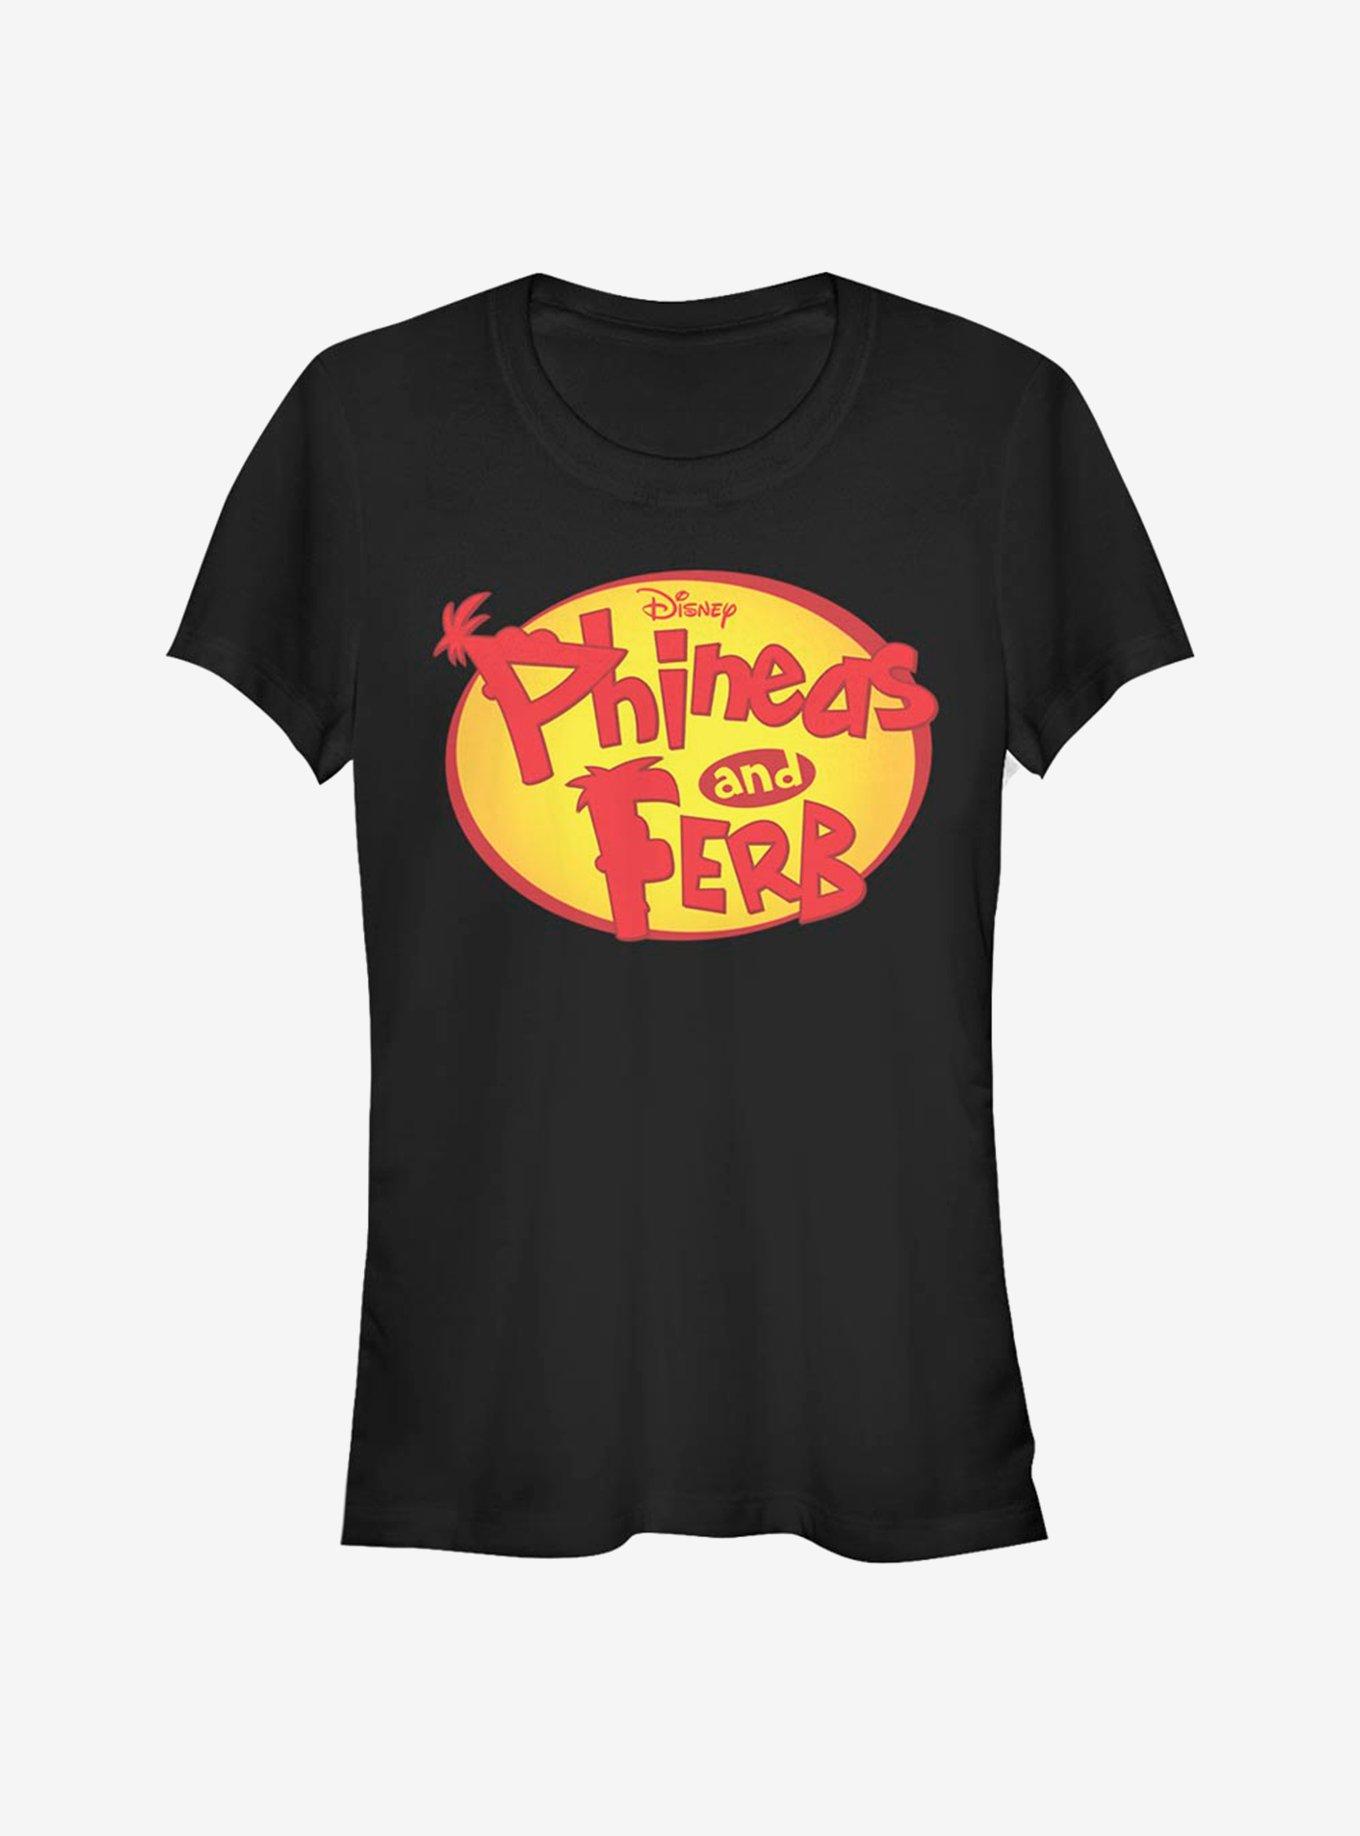 Disney Phineas And Ferb Oval Logo Girls T-Shirt, BLACK, hi-res